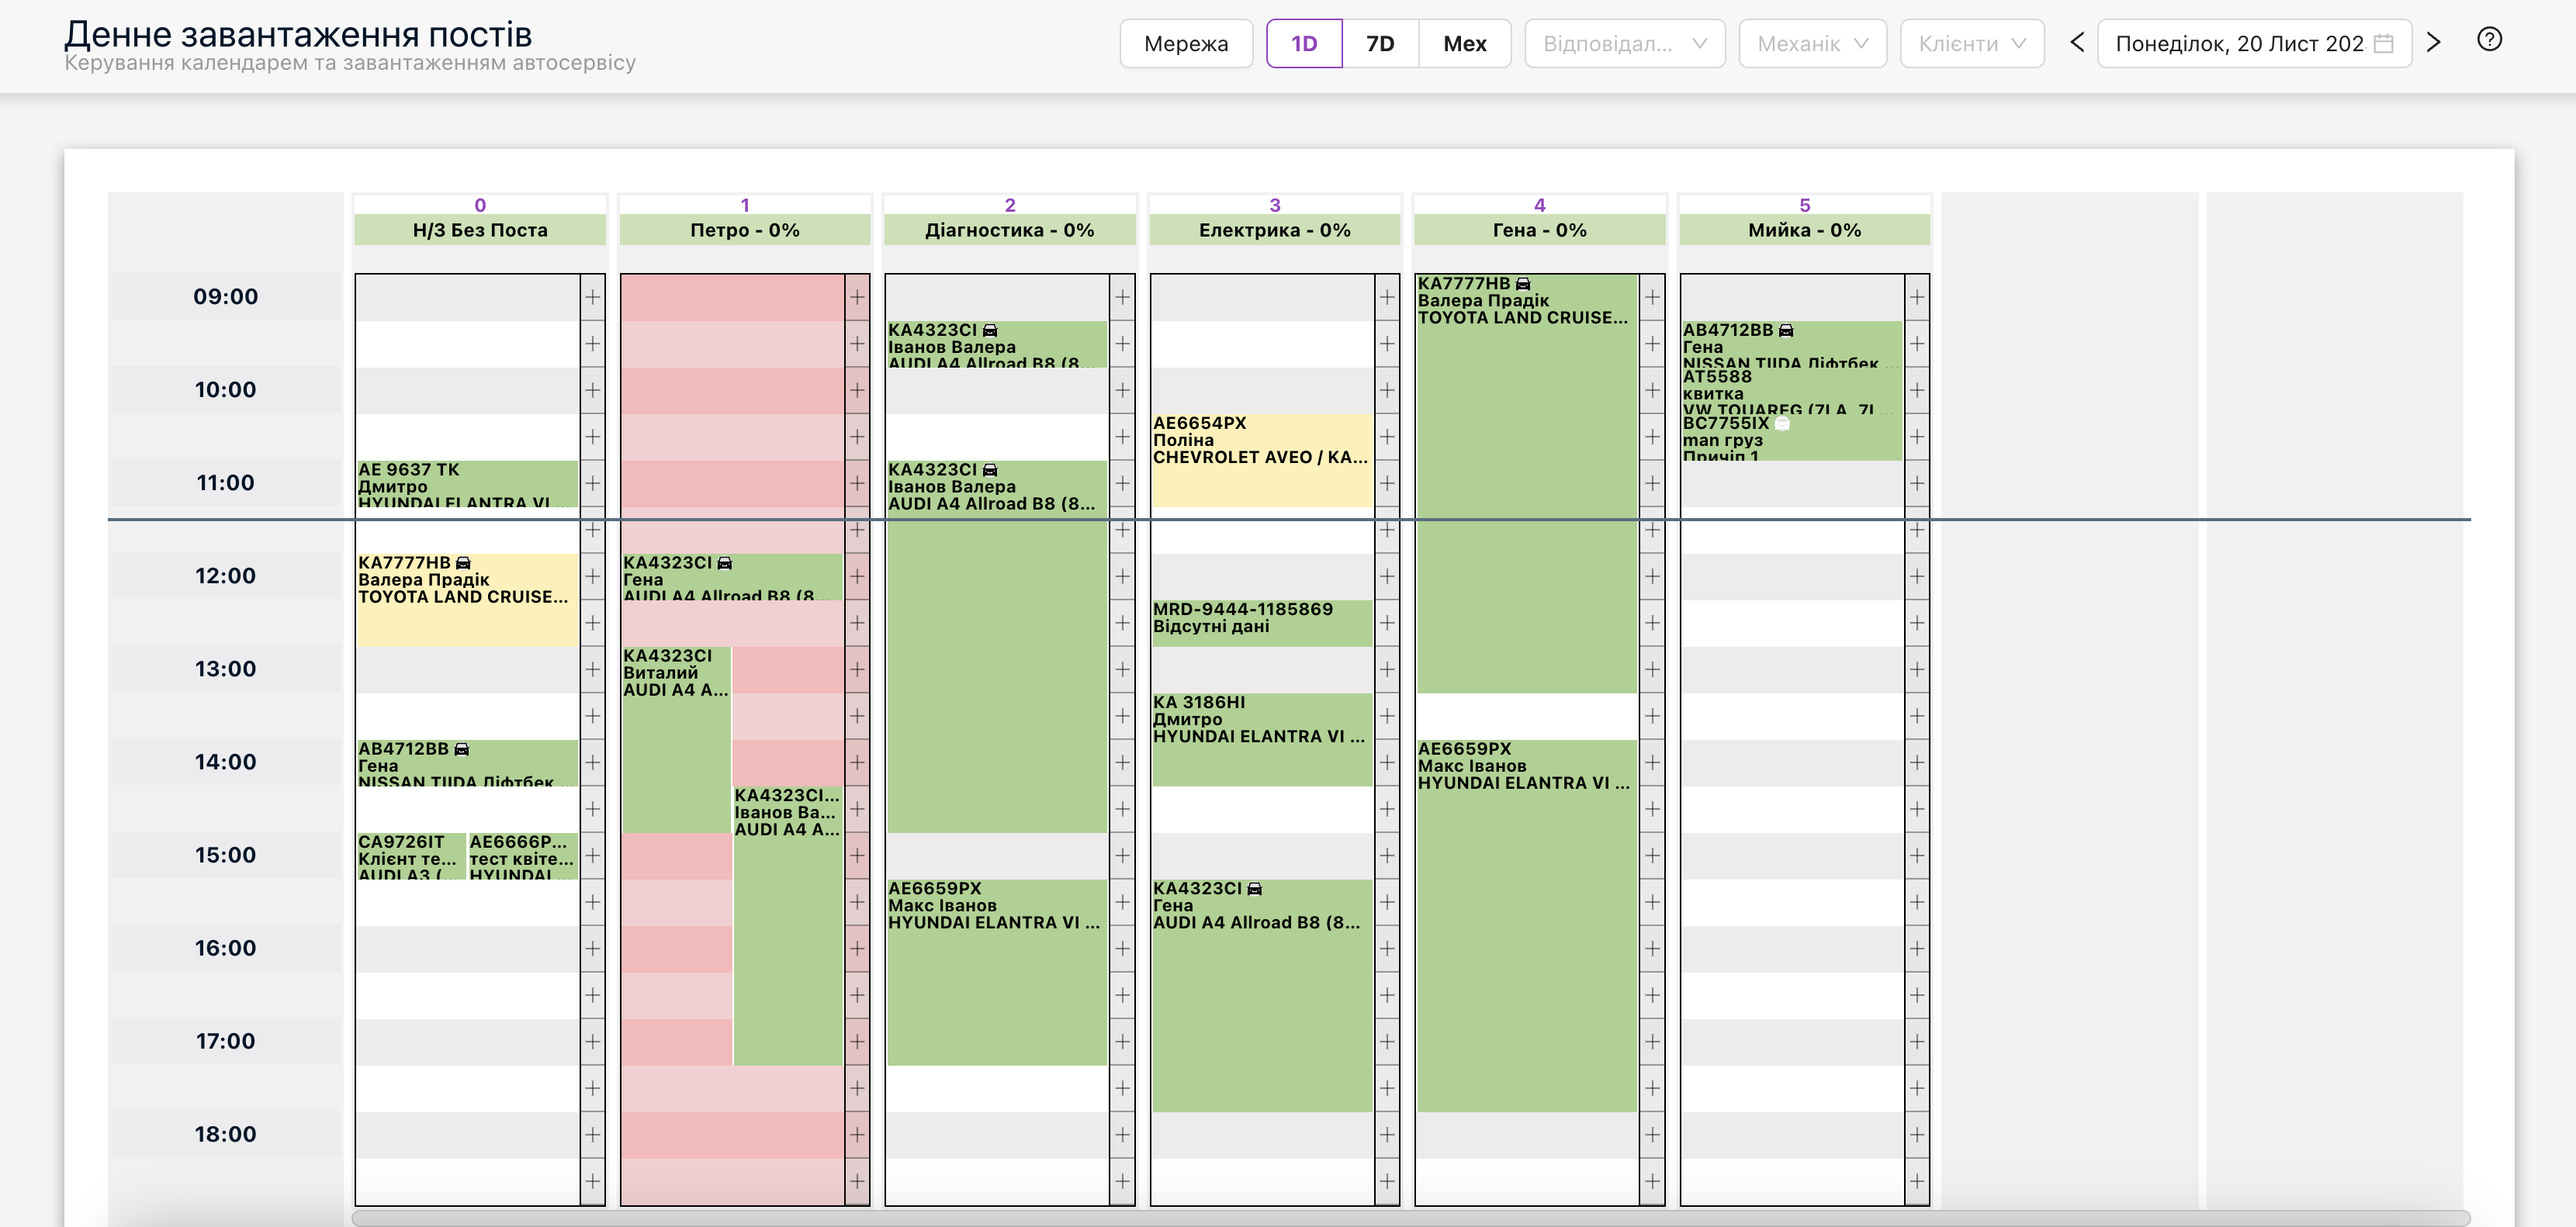 Scheduler window - download for a specific day, week and separate daily download for the mechanic.